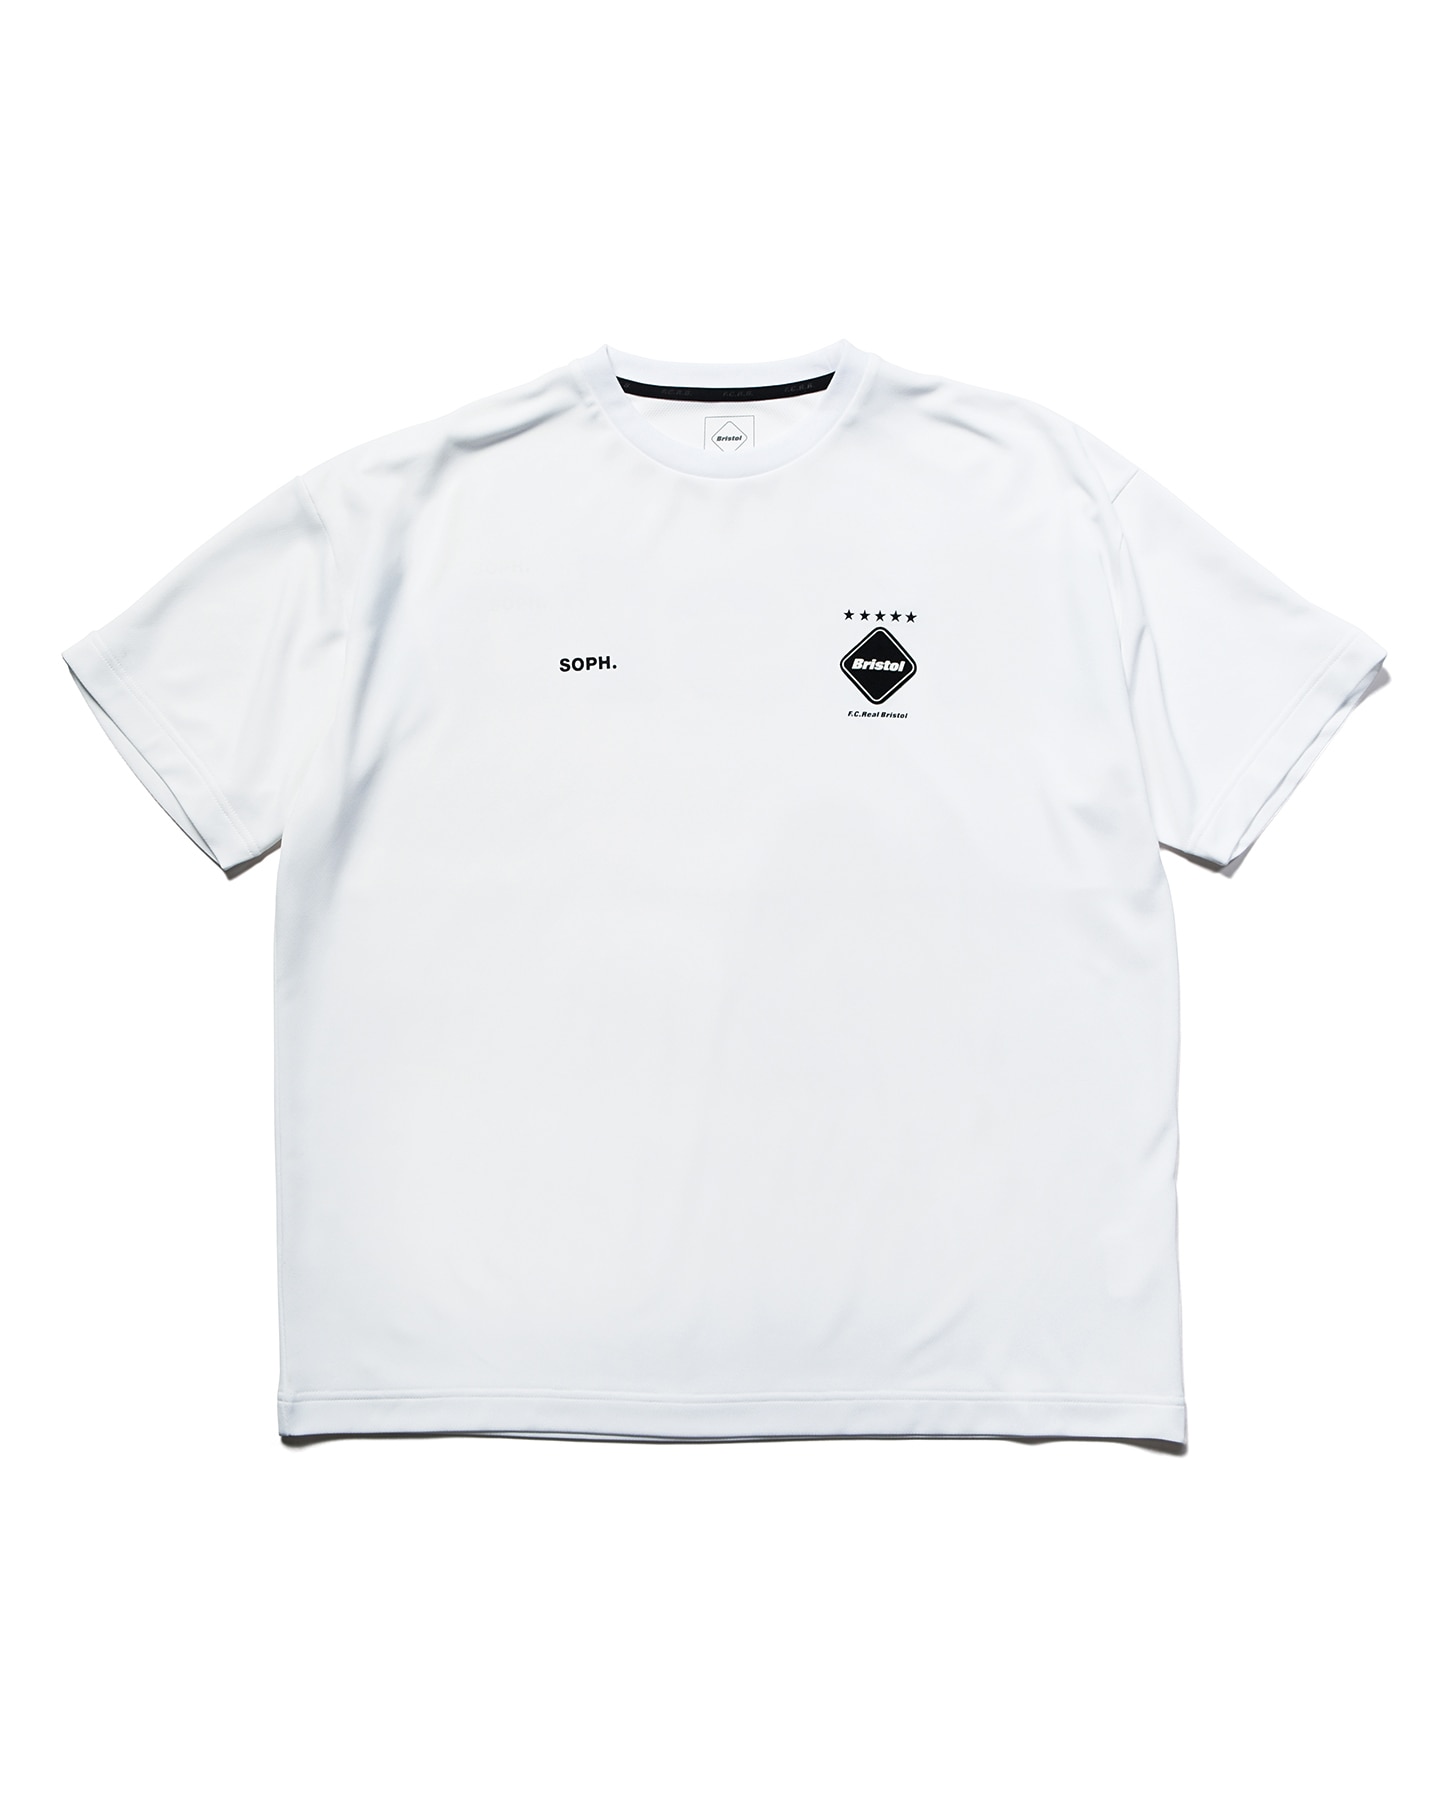 POLYESTEFCRB BIG LOGO WIDE TEE Tシャツ